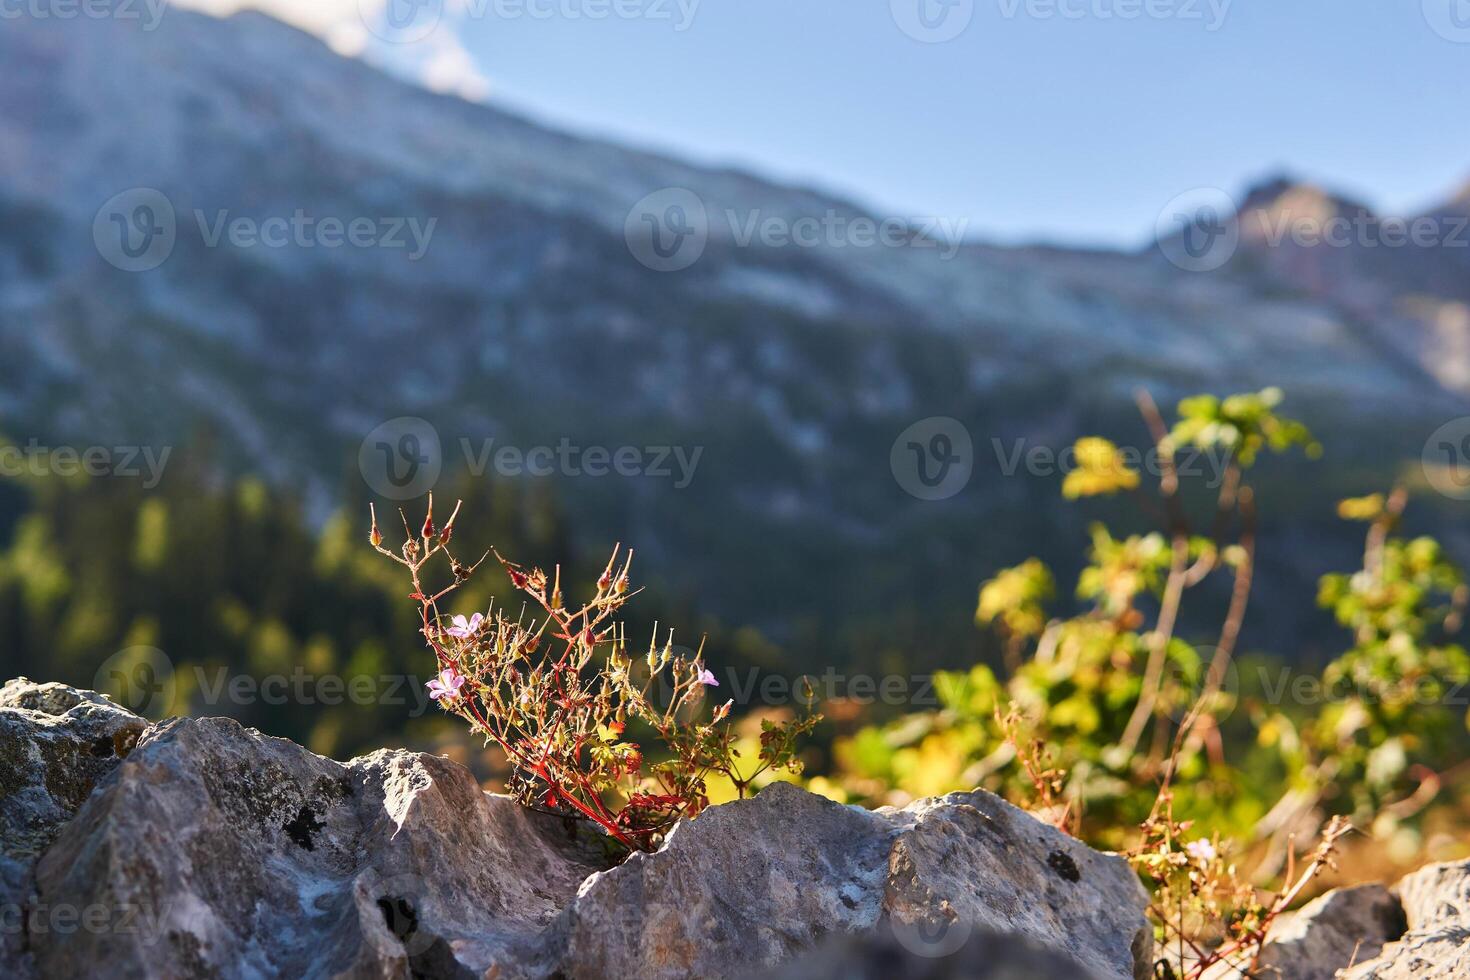 blooming bush of Roberts geranium grows in the crevice of the rock photo